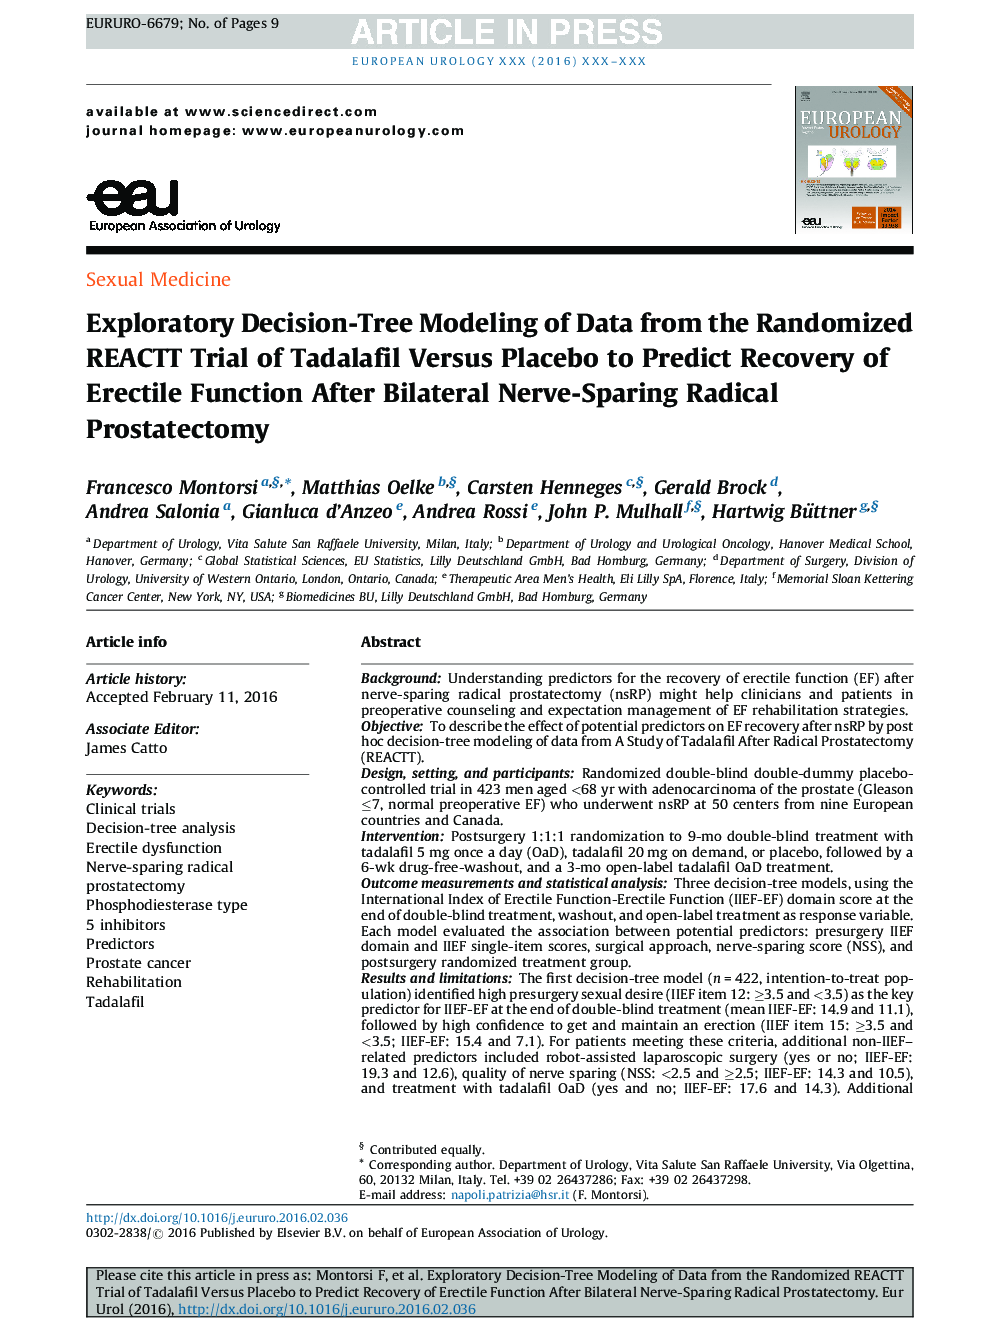 Exploratory Decision-Tree Modeling of Data from the Randomized REACTT Trial of Tadalafil Versus Placebo to Predict Recovery of Erectile Function After Bilateral Nerve-Sparing Radical Prostatectomy